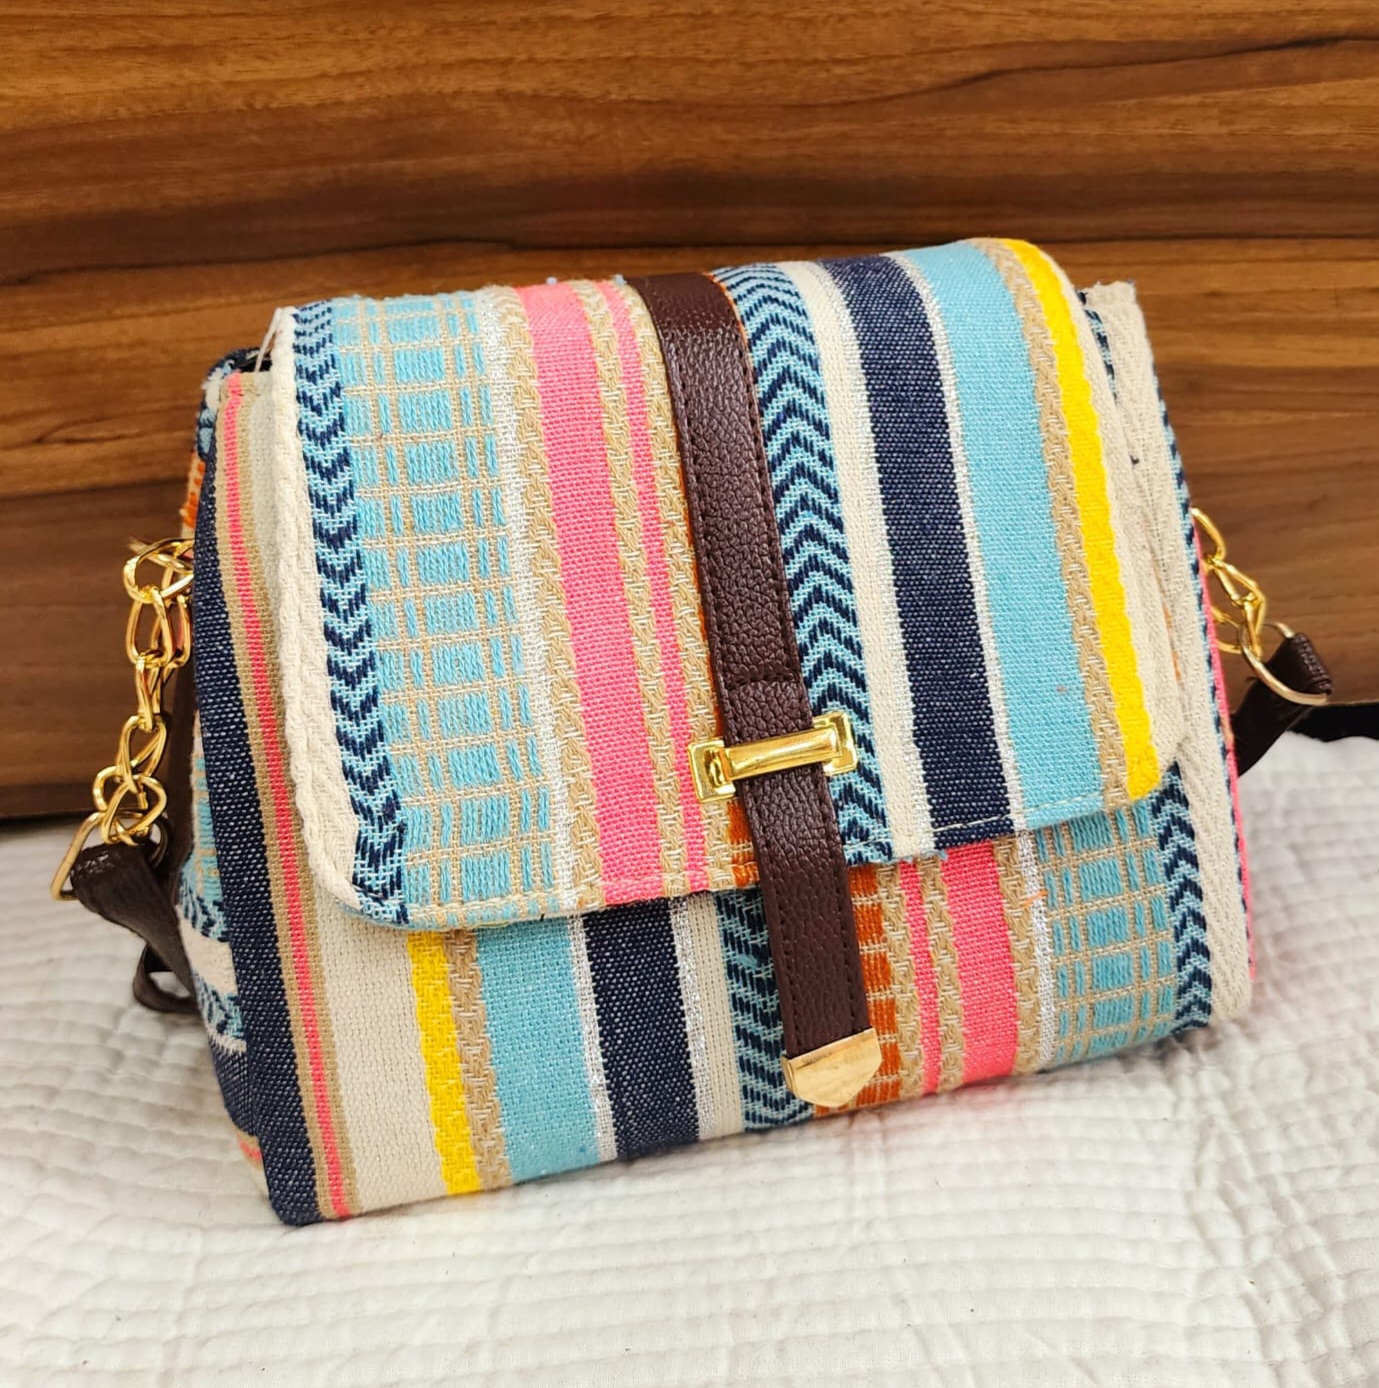 Fossil Striped Multi Colored Leather Shoulder Bag With Key - Etsy